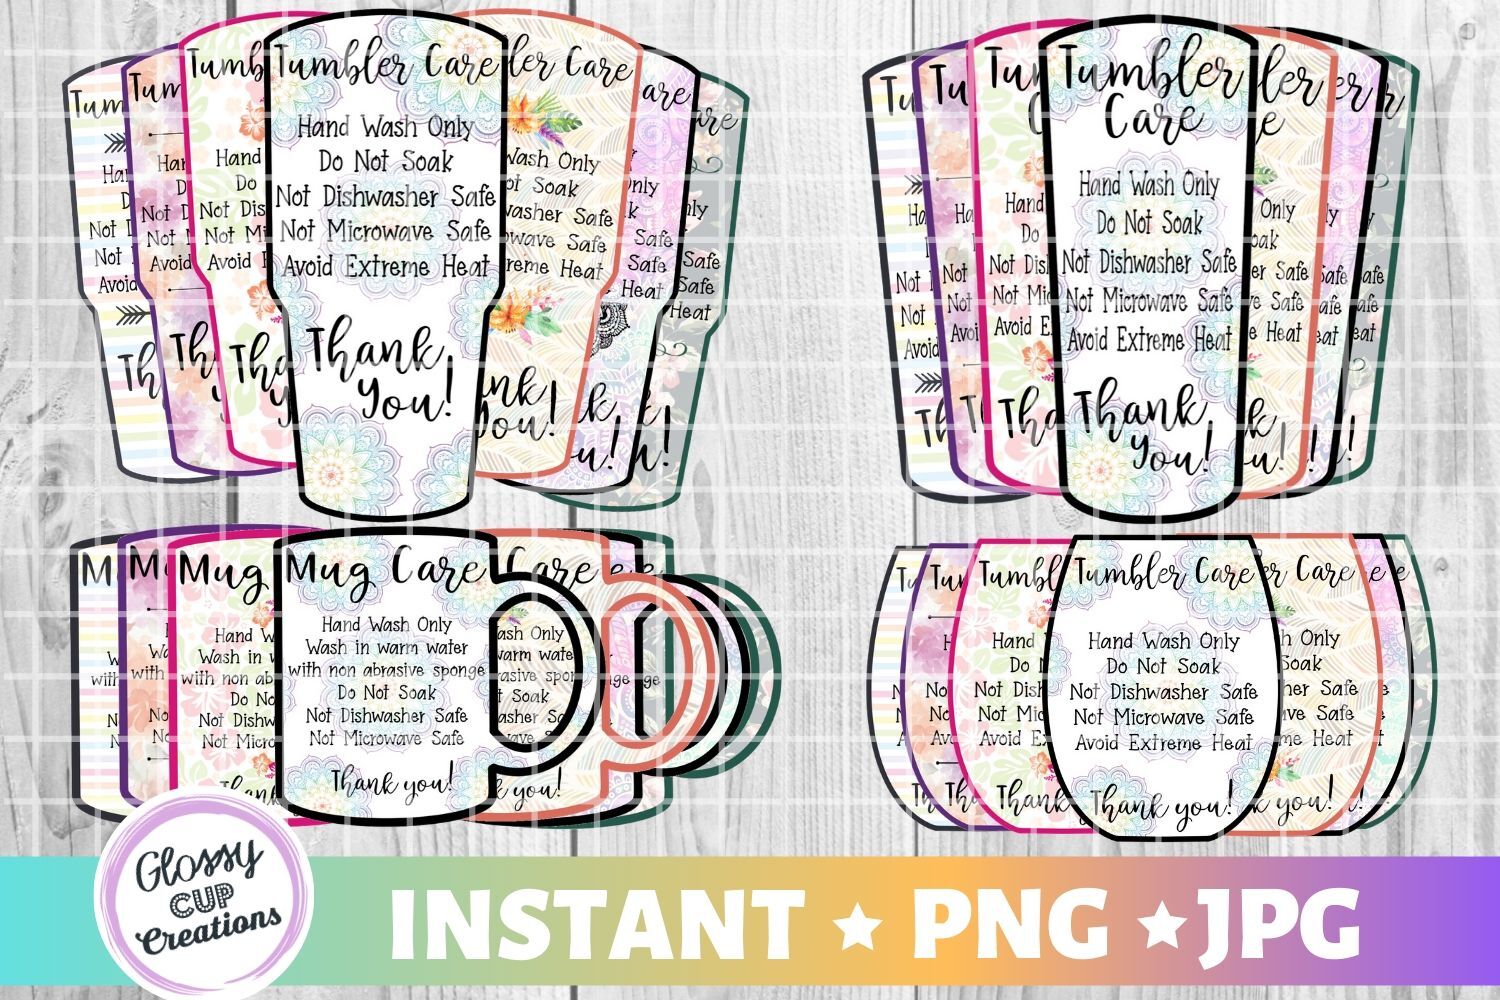 Download Mega Tumbler Care Card Pack, PNG, Print and Cut, 7 Designs! By Glossy Cup Creations ...